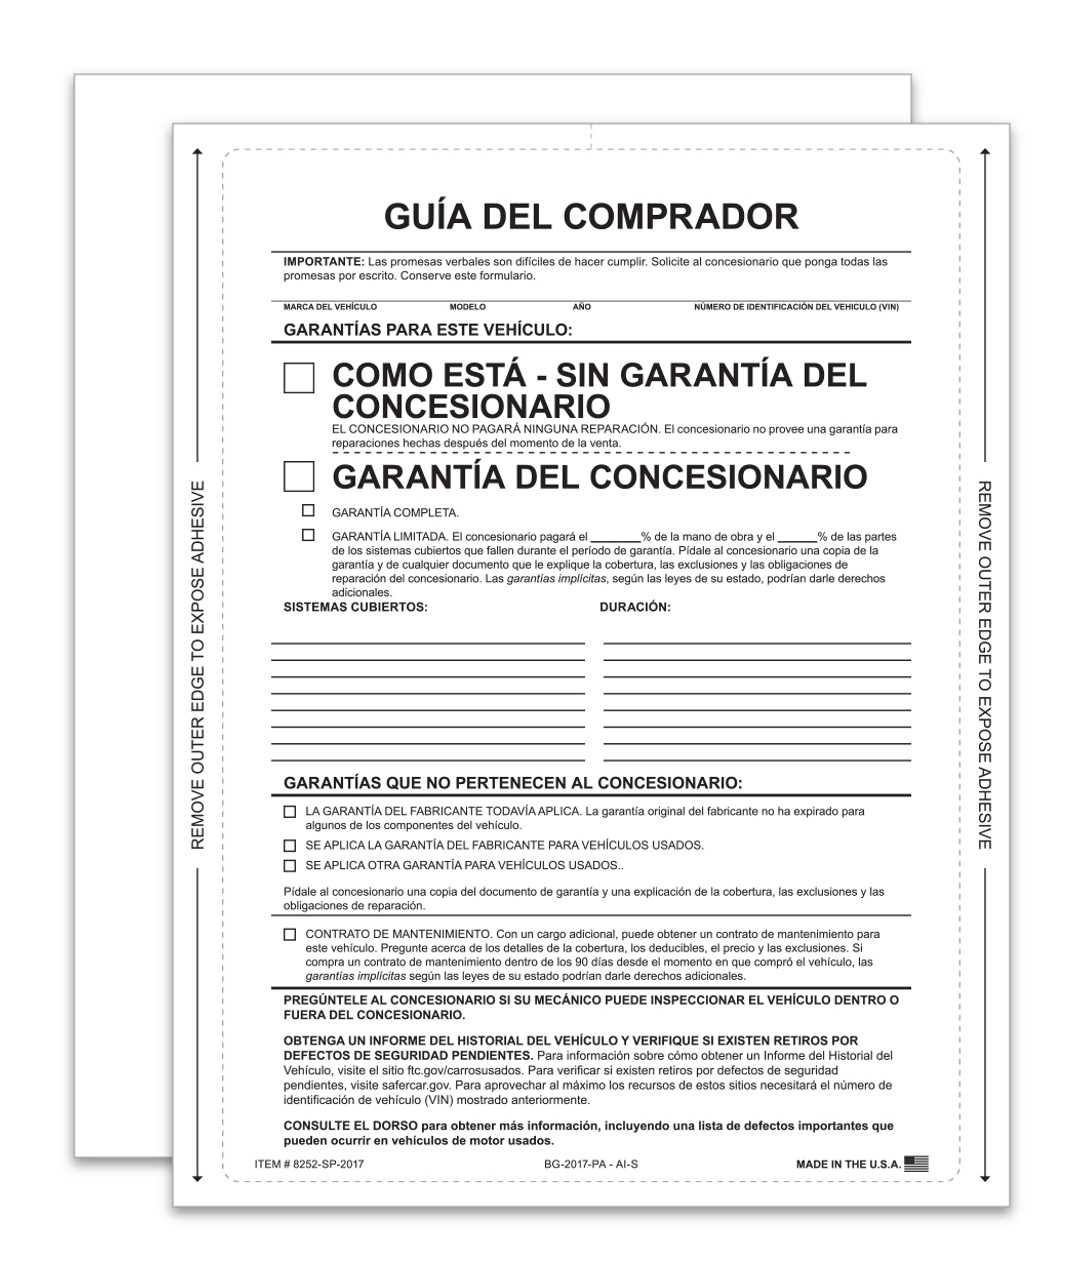 Interior Buyers Guide - BG-2017 - As Is - P/A - Spanish - Qty. 100